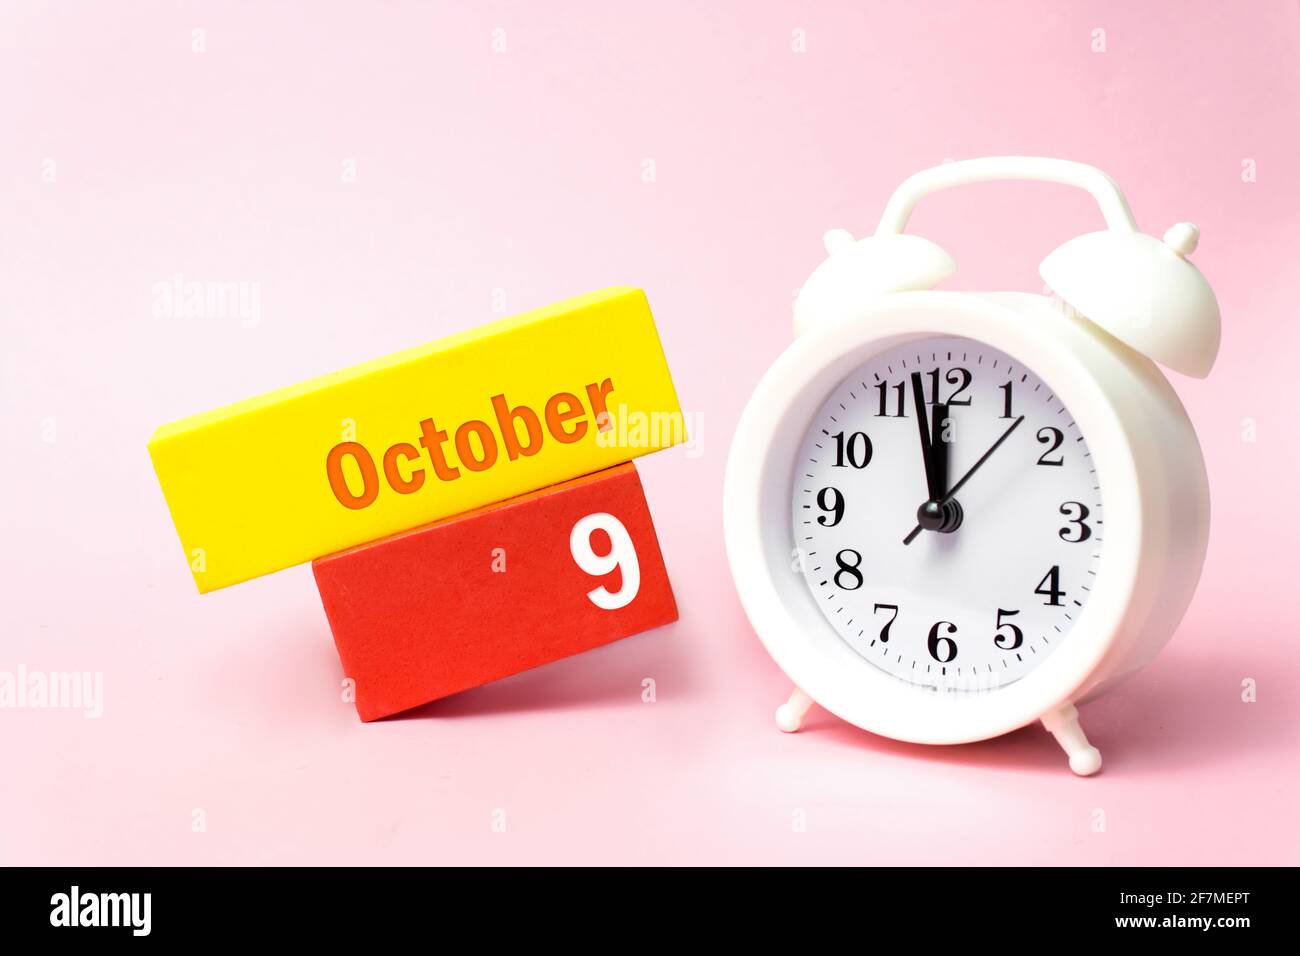 October 9th. Day 9 of month, Calendar date. White alarm clock on pastel pink background. Autumn month, day of the year concept Stock Photo